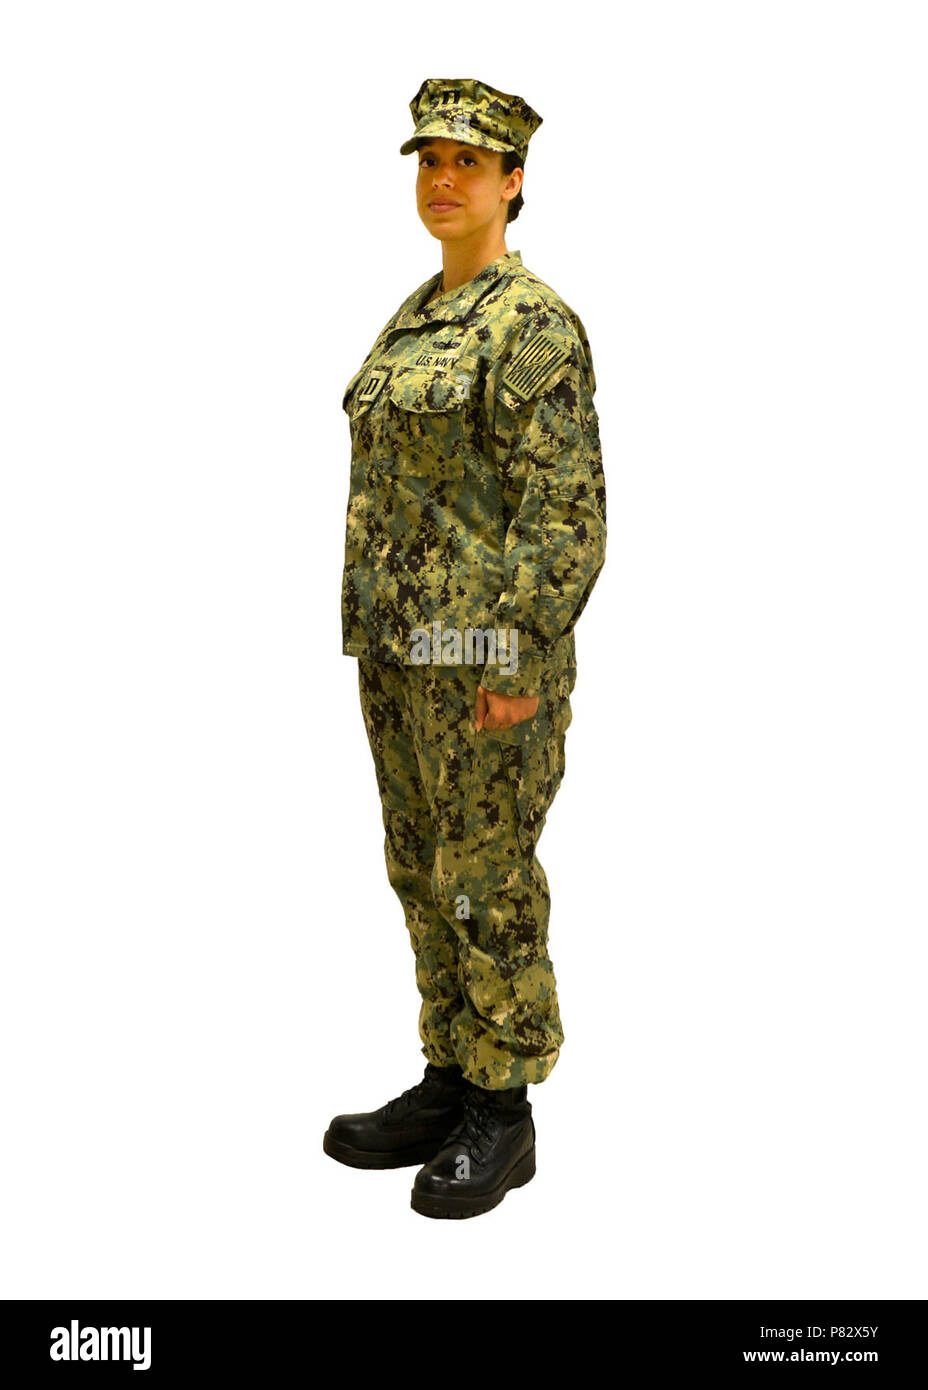 WASHINGTON (Aug. 3, 2016) The Dept. of the Navy announced that it will  transition from the Navy Working Uniform (NWU) Type I to the NWU Type III  as its primary shore working